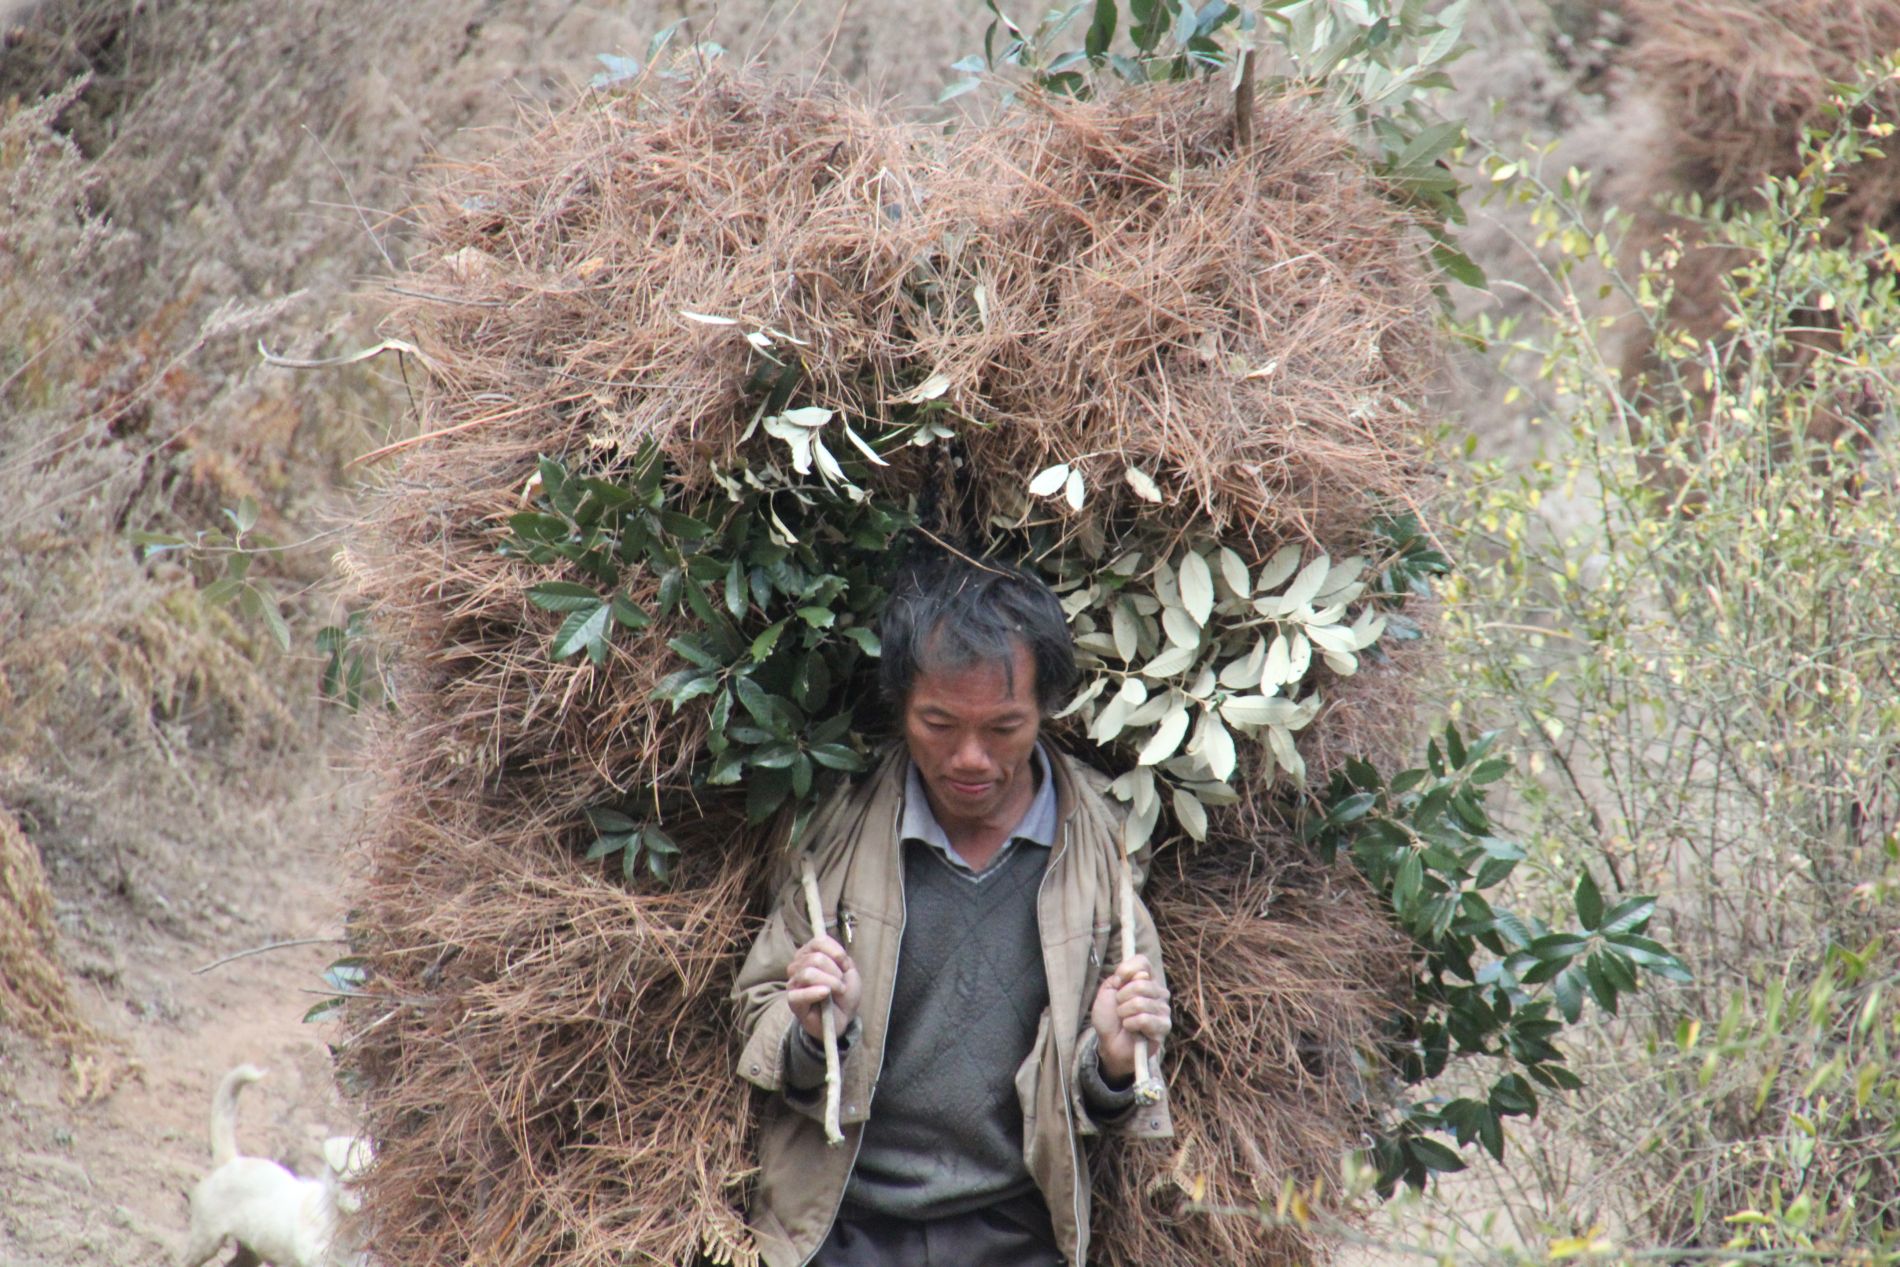 A man carries hay in in China's Tiger Leaping Gorge.